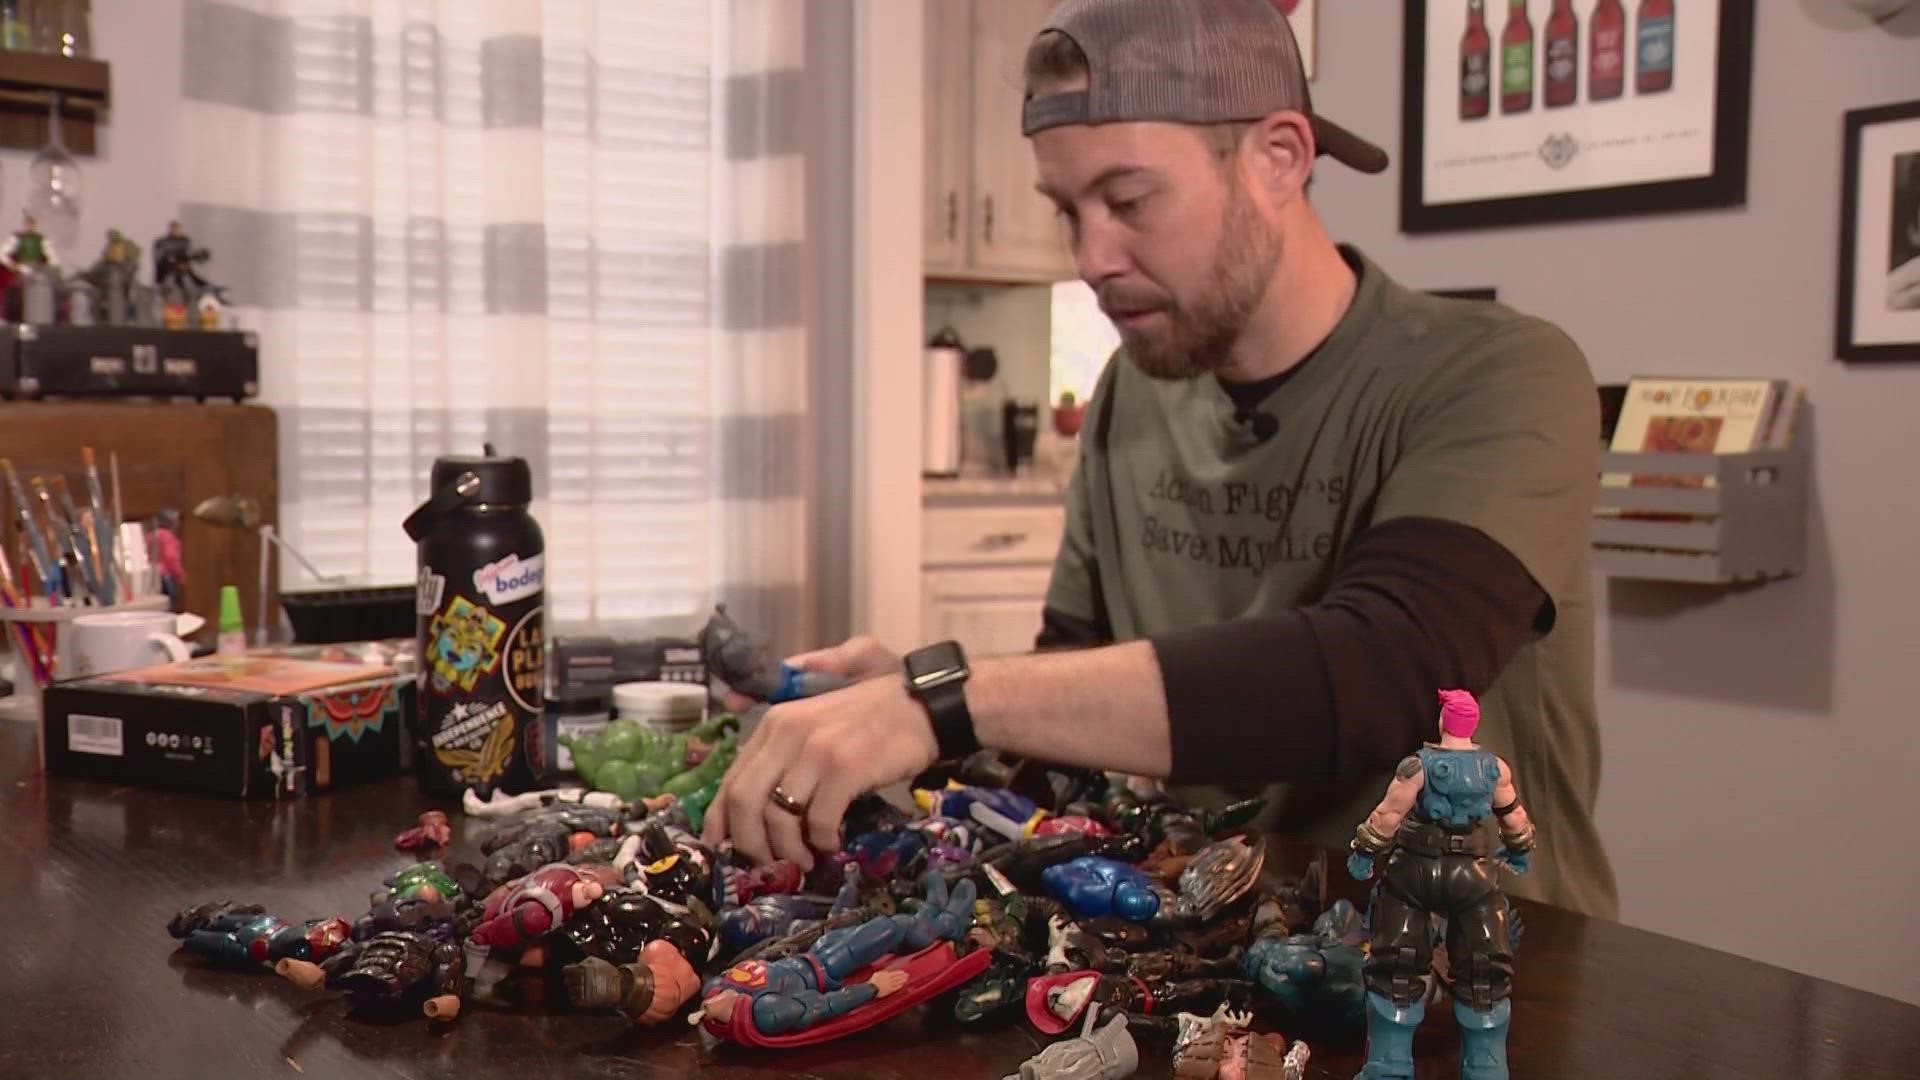 Evanflow Customs takes action figures and transforms them.